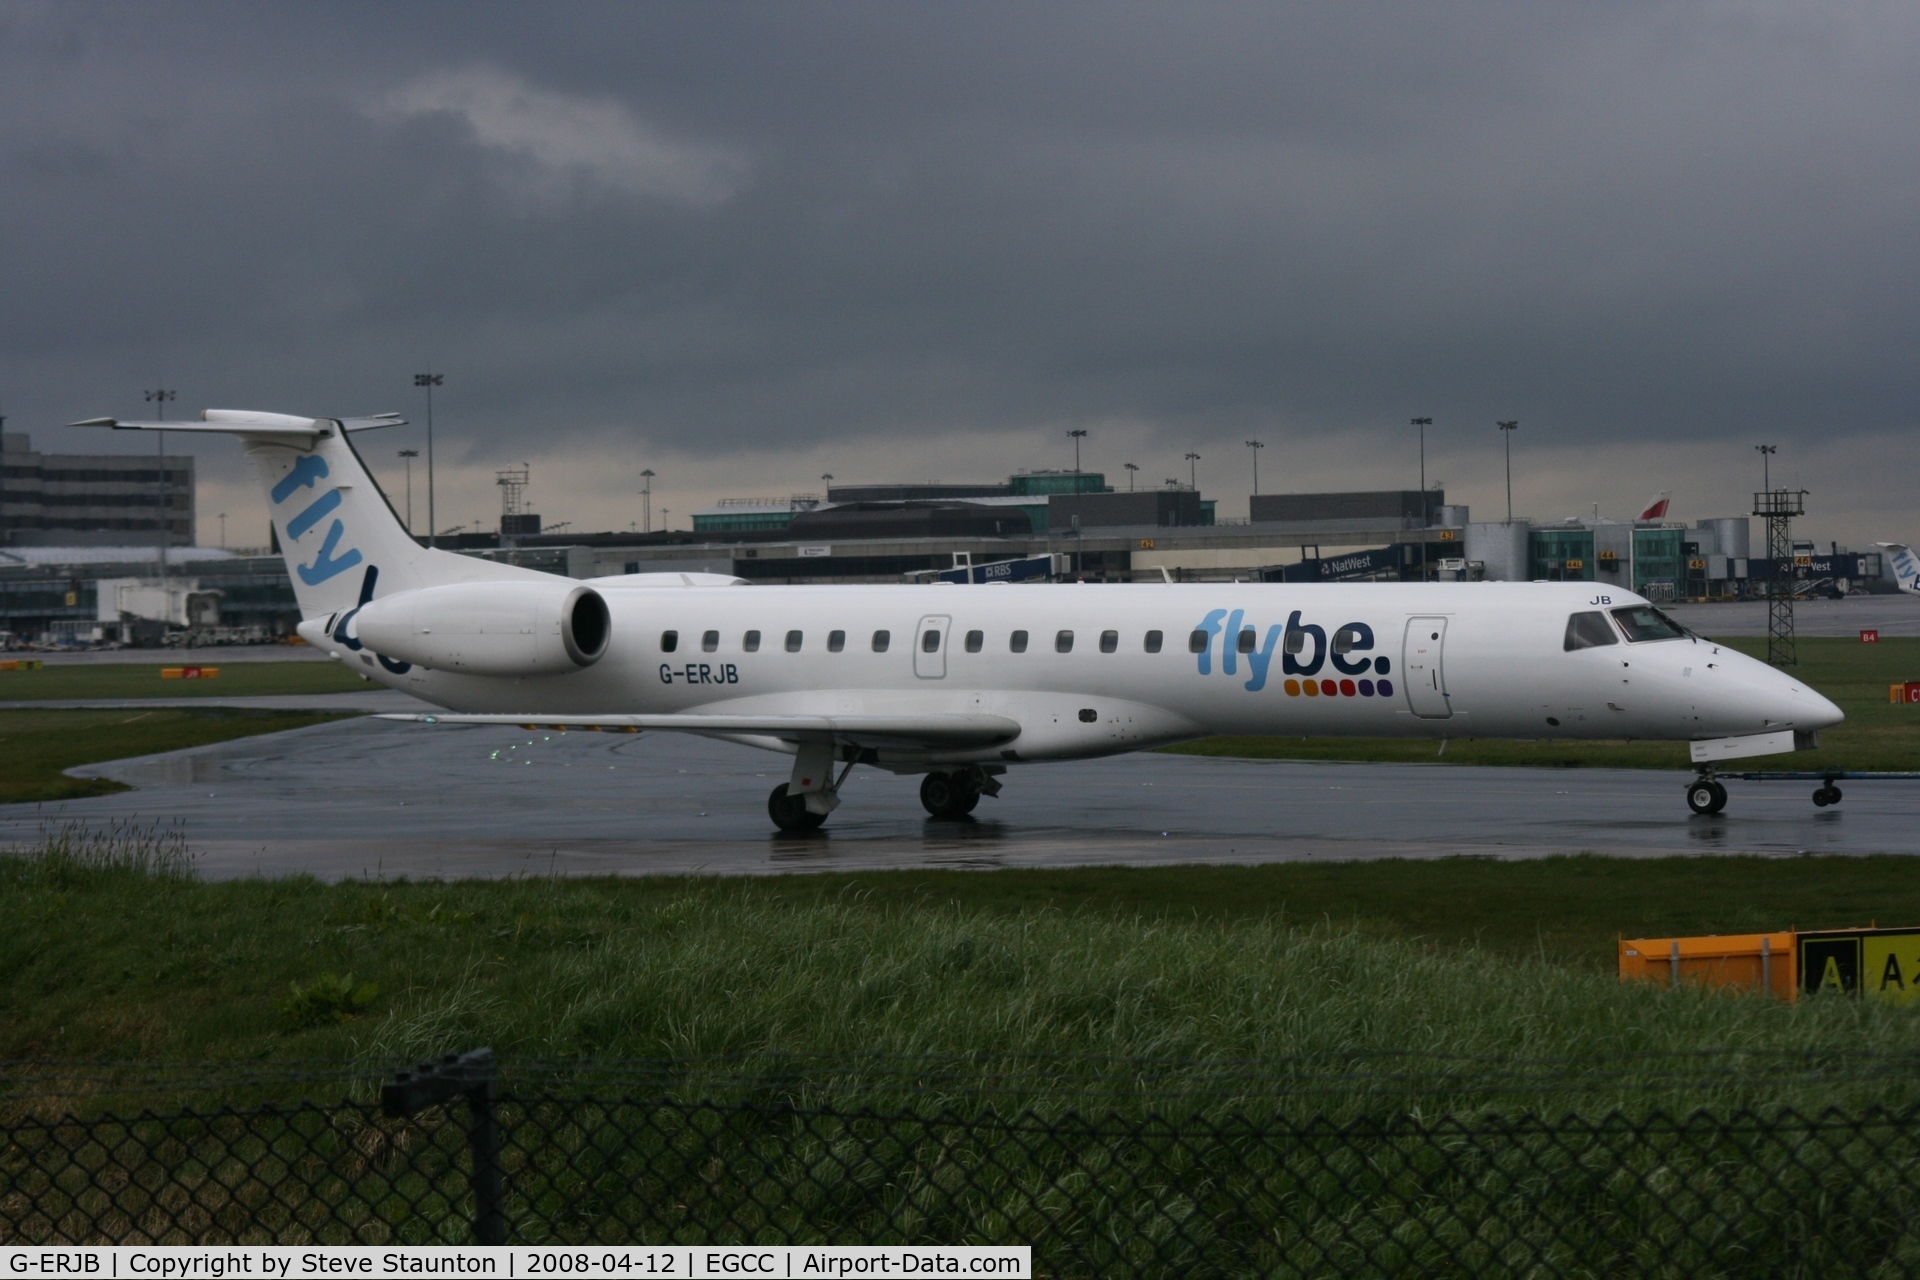 G-ERJB, 2000 Embraer EMB-145EP (ERJ-145EP) C/N 145237, Taken at Manchester Airport on a typical showery April day